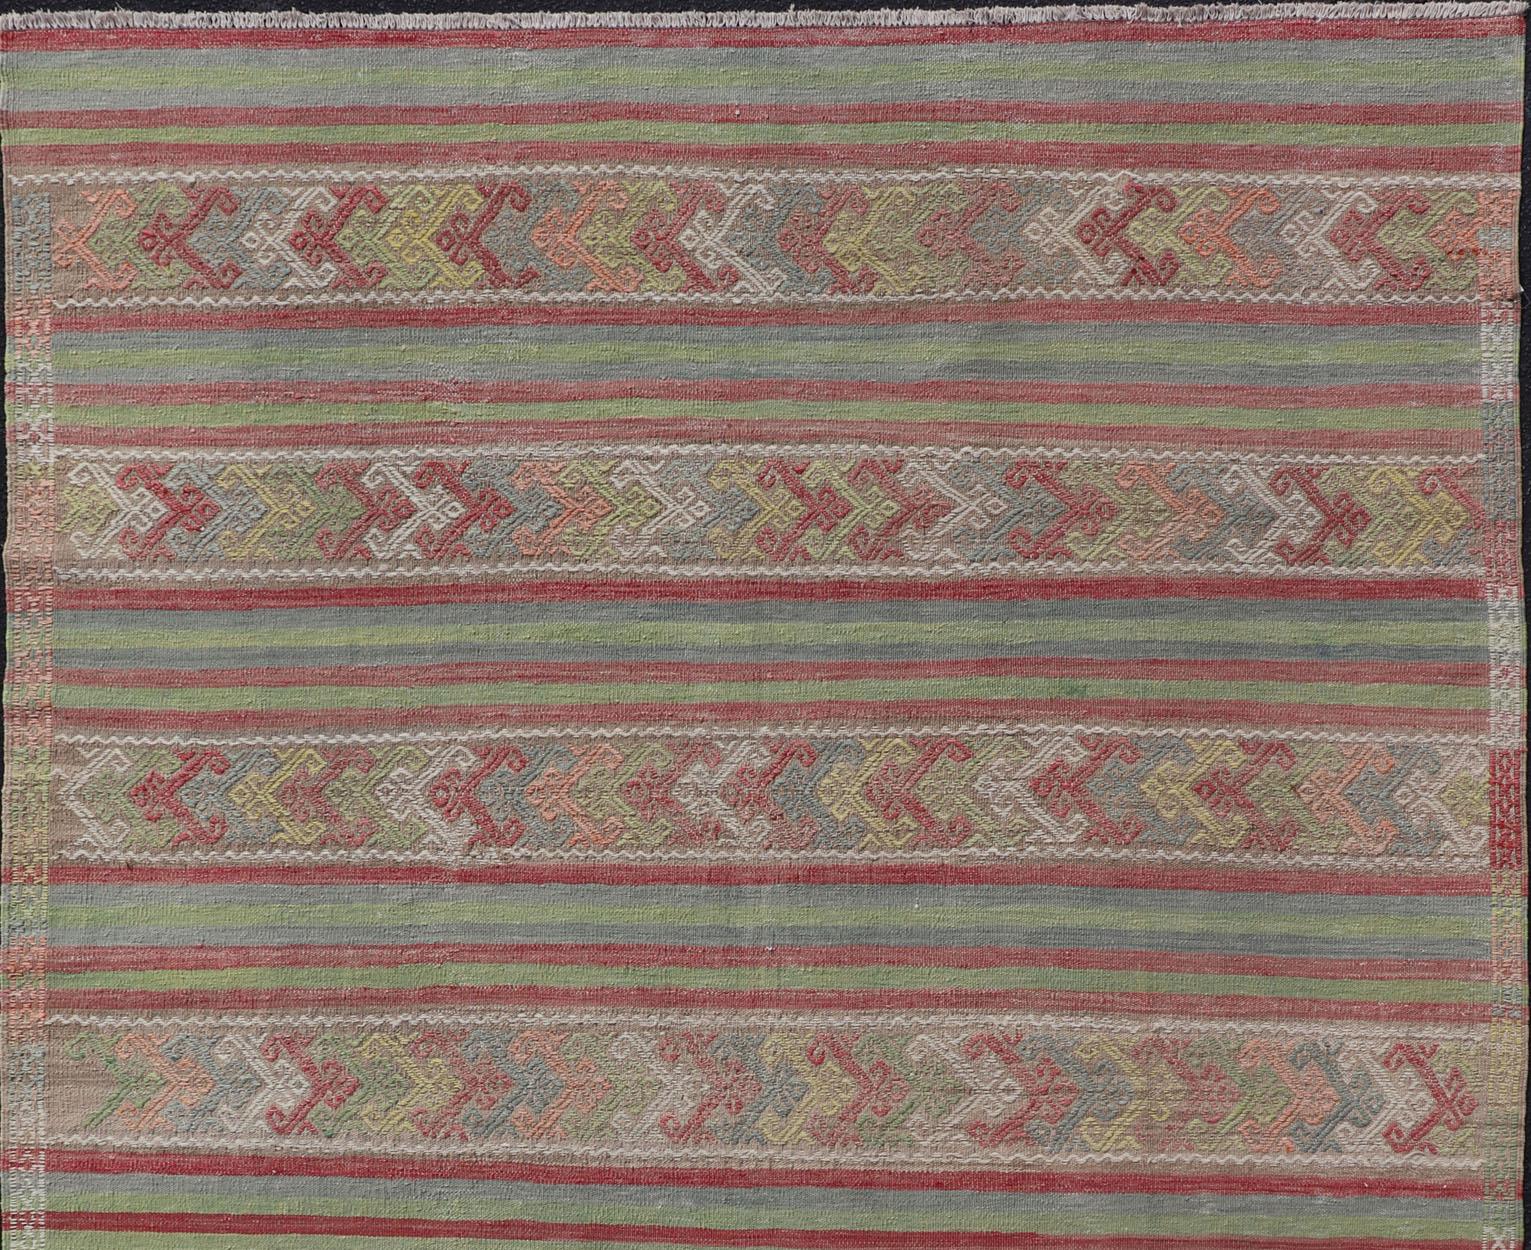 Hand-Woven Colorful Vintage Embroidered Kilim with Stripes and Alternating Geometric Motifs For Sale